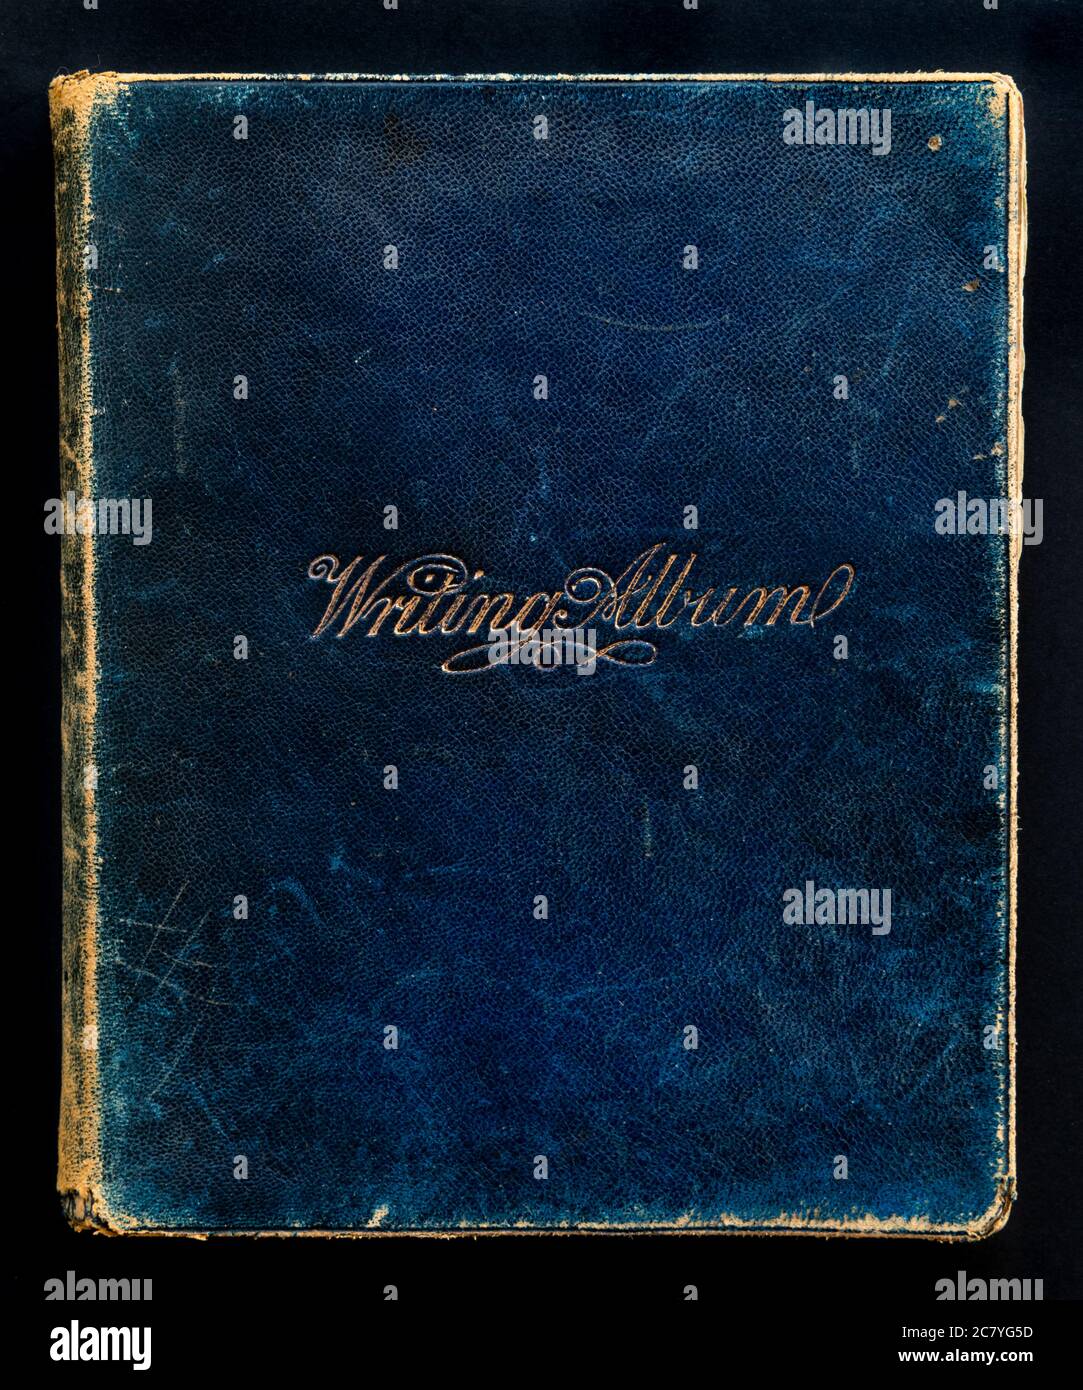 Victorian lady's writing album also known as a victorian autograph book with blue cover - UK Stock Photo